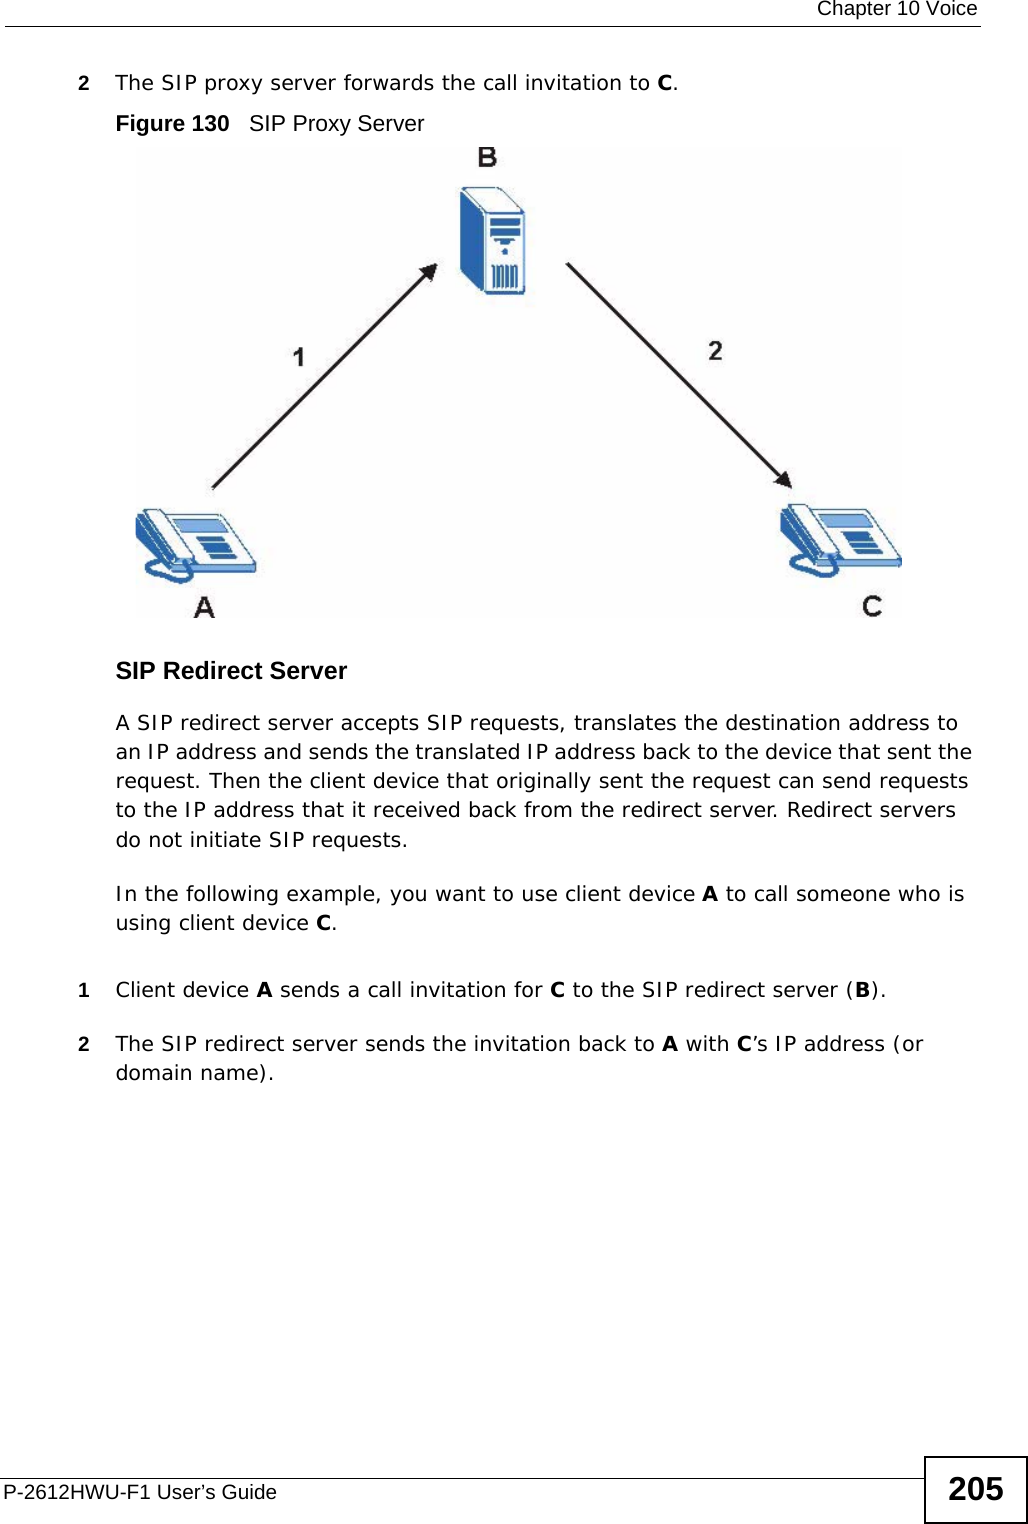  Chapter 10 VoiceP-2612HWU-F1 User’s Guide 2052The SIP proxy server forwards the call invitation to C.Figure 130   SIP Proxy ServerSIP Redirect ServerA SIP redirect server accepts SIP requests, translates the destination address to an IP address and sends the translated IP address back to the device that sent the request. Then the client device that originally sent the request can send requests to the IP address that it received back from the redirect server. Redirect servers do not initiate SIP requests. In the following example, you want to use client device A to call someone who is using client device C. 1Client device A sends a call invitation for C to the SIP redirect server (B).2The SIP redirect server sends the invitation back to A with C’s IP address (or domain name).